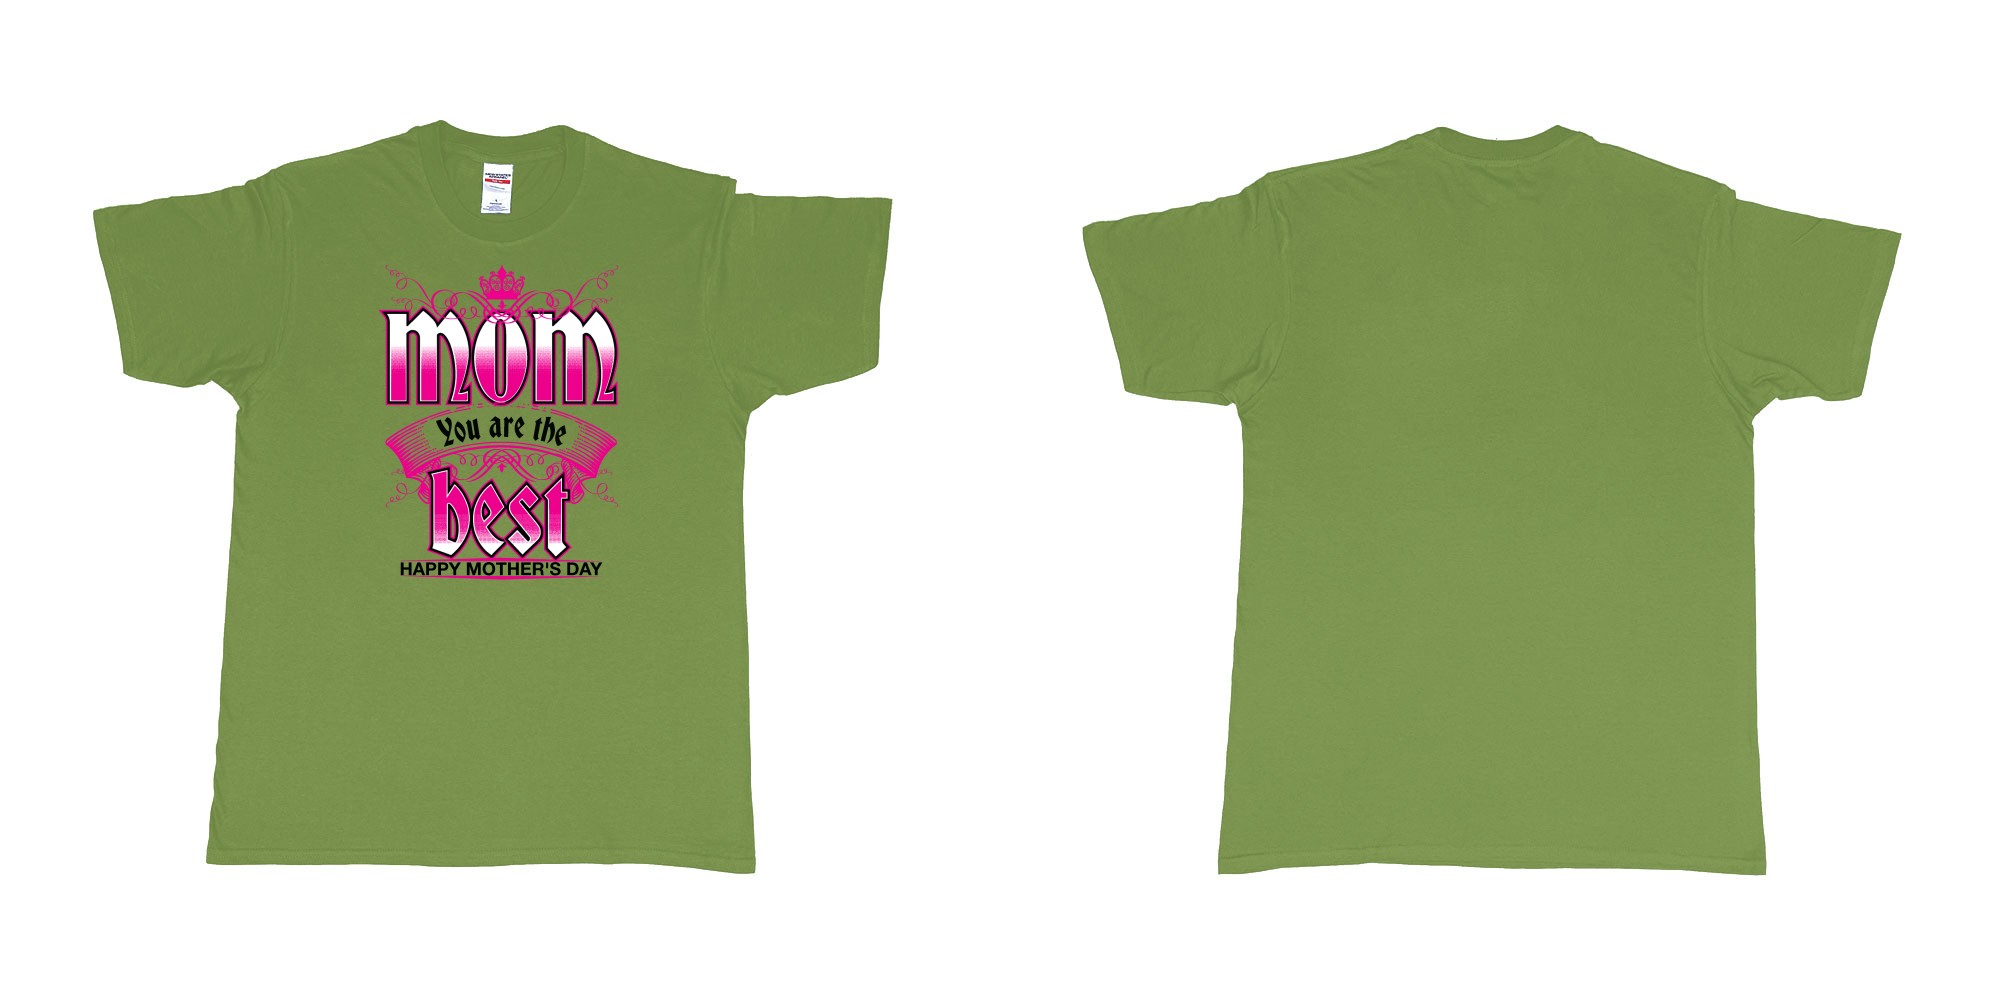 Custom tshirt design crown mom you are the best happy morthers day in fabric color military-green choice your own text made in Bali by The Pirate Way